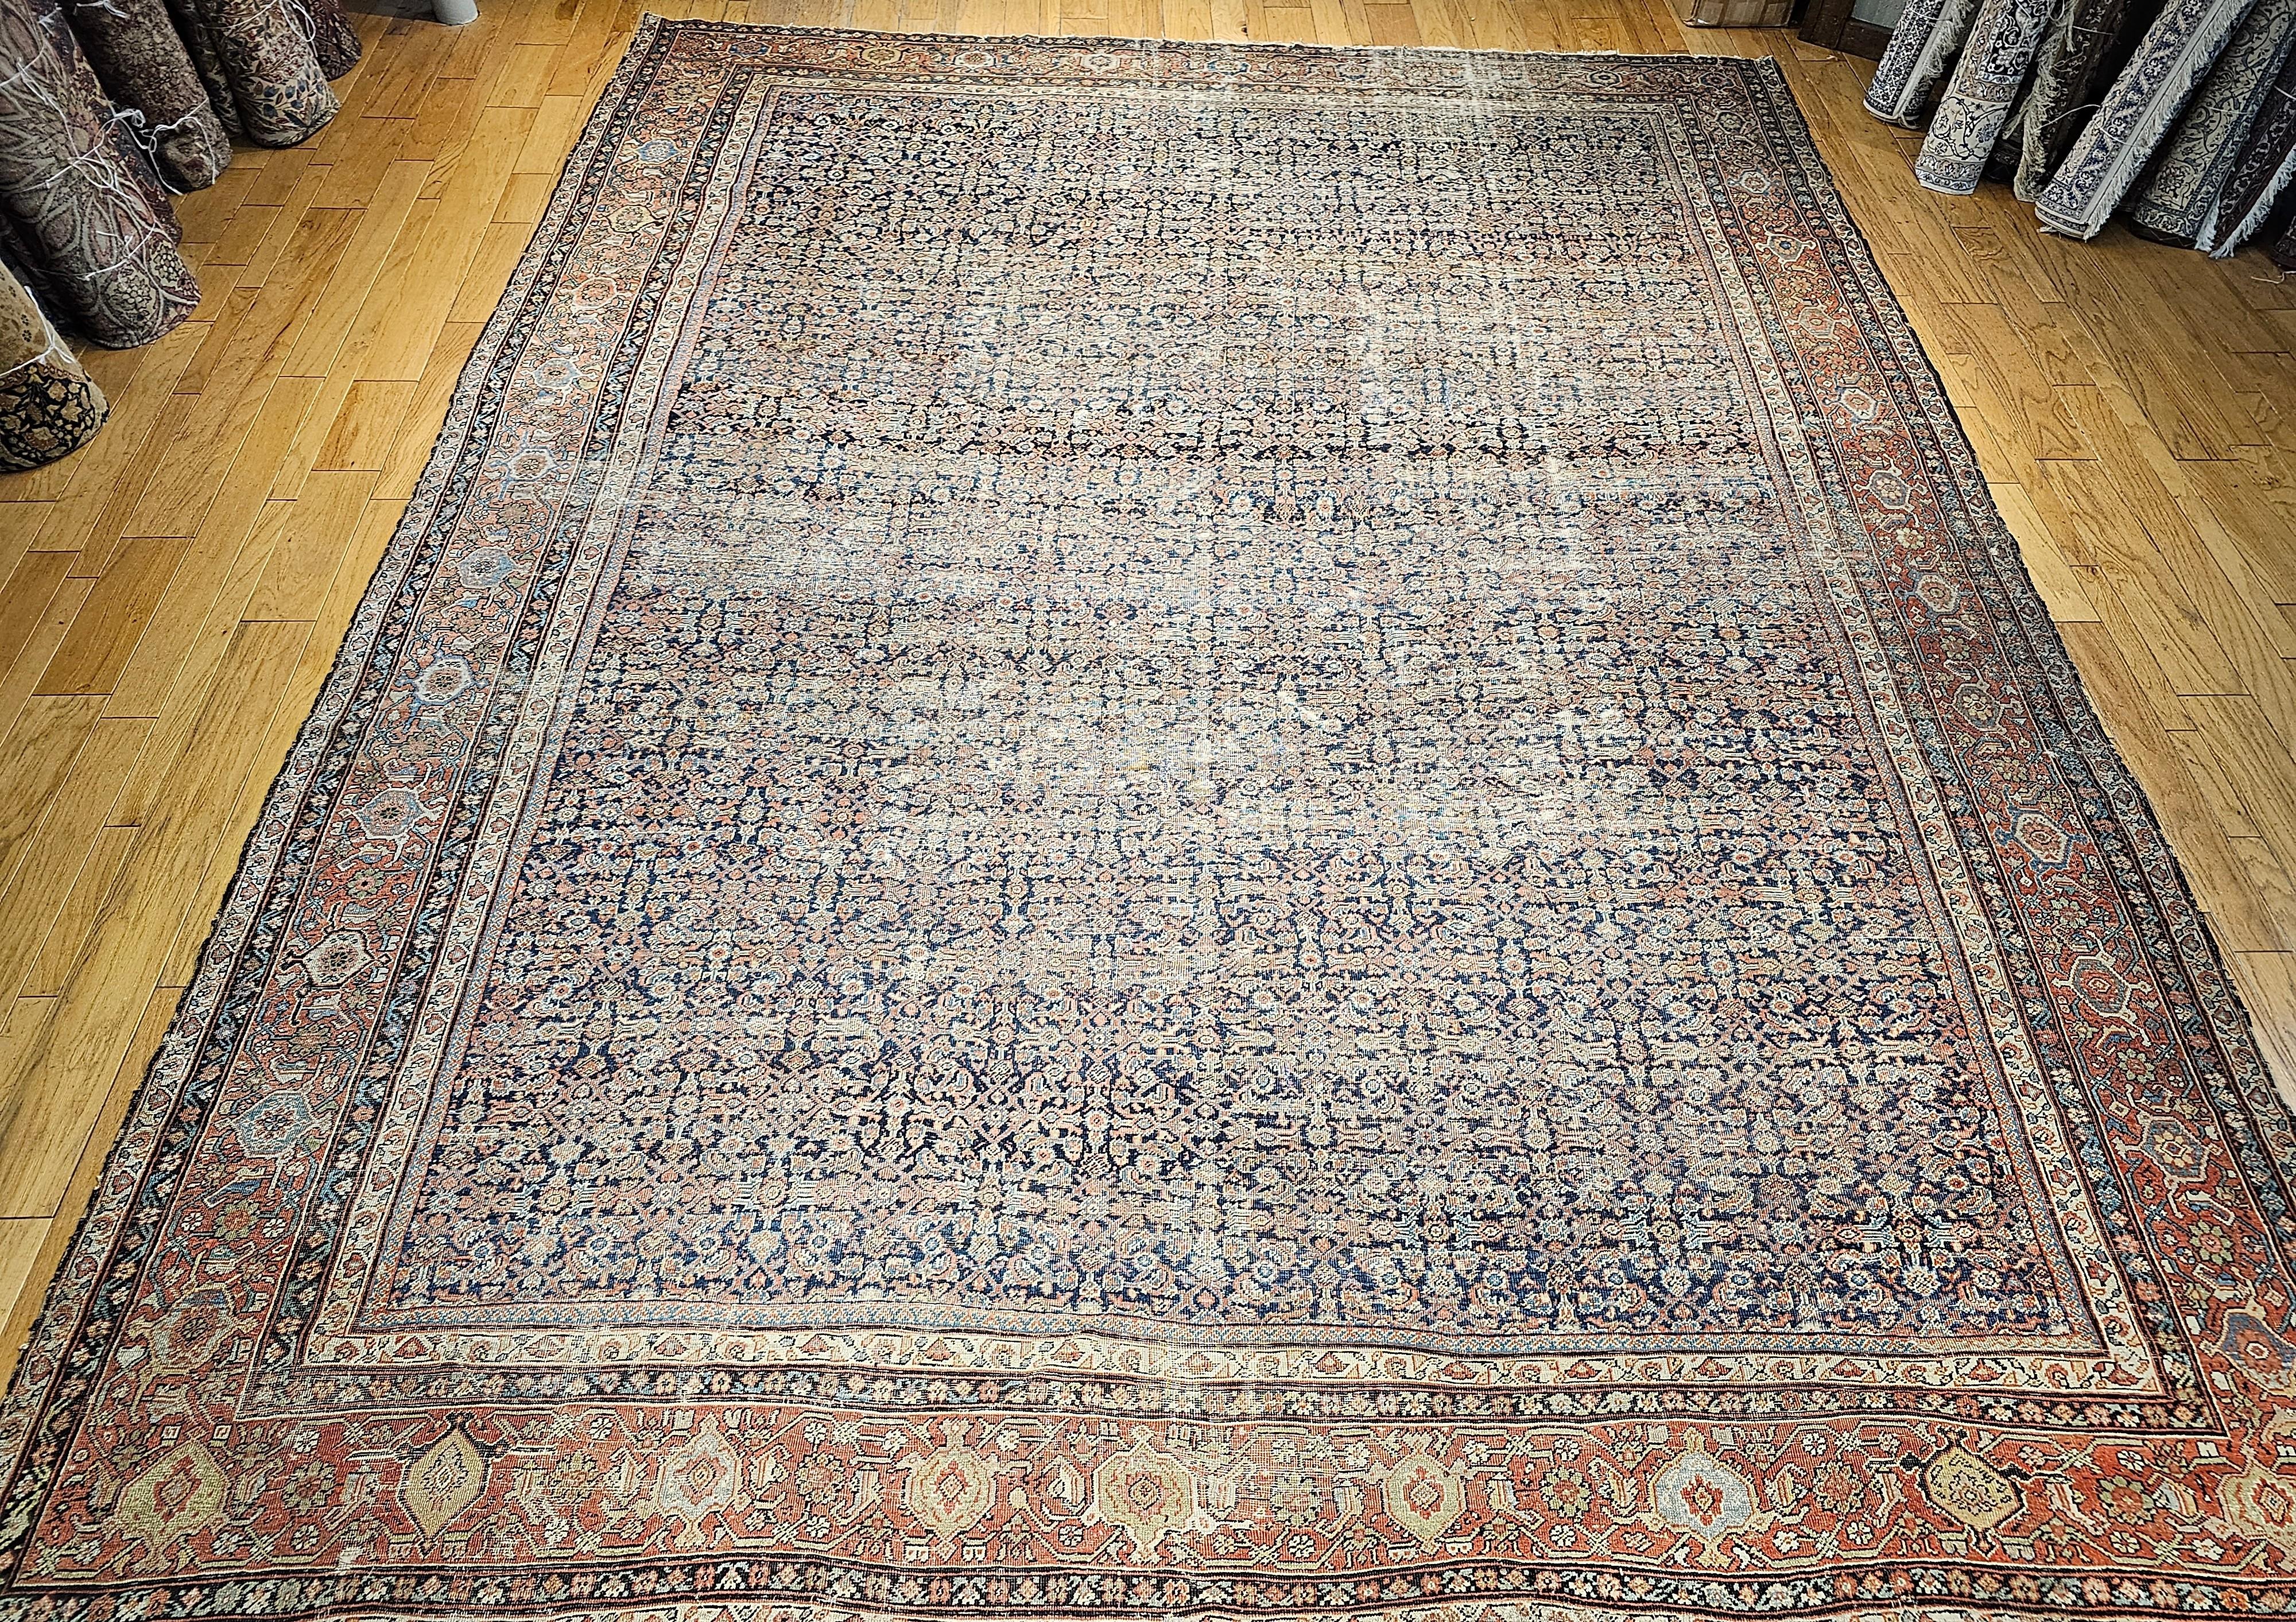 A wonderful 19th century Persian Farahan in an all-over Herati pattern in an oversized or “mansion size” in navy blue, green, blue, pale yellow.  This extremely finely hand woven Farahan rug from Western Persia has a “Herati” all-over pattern set in